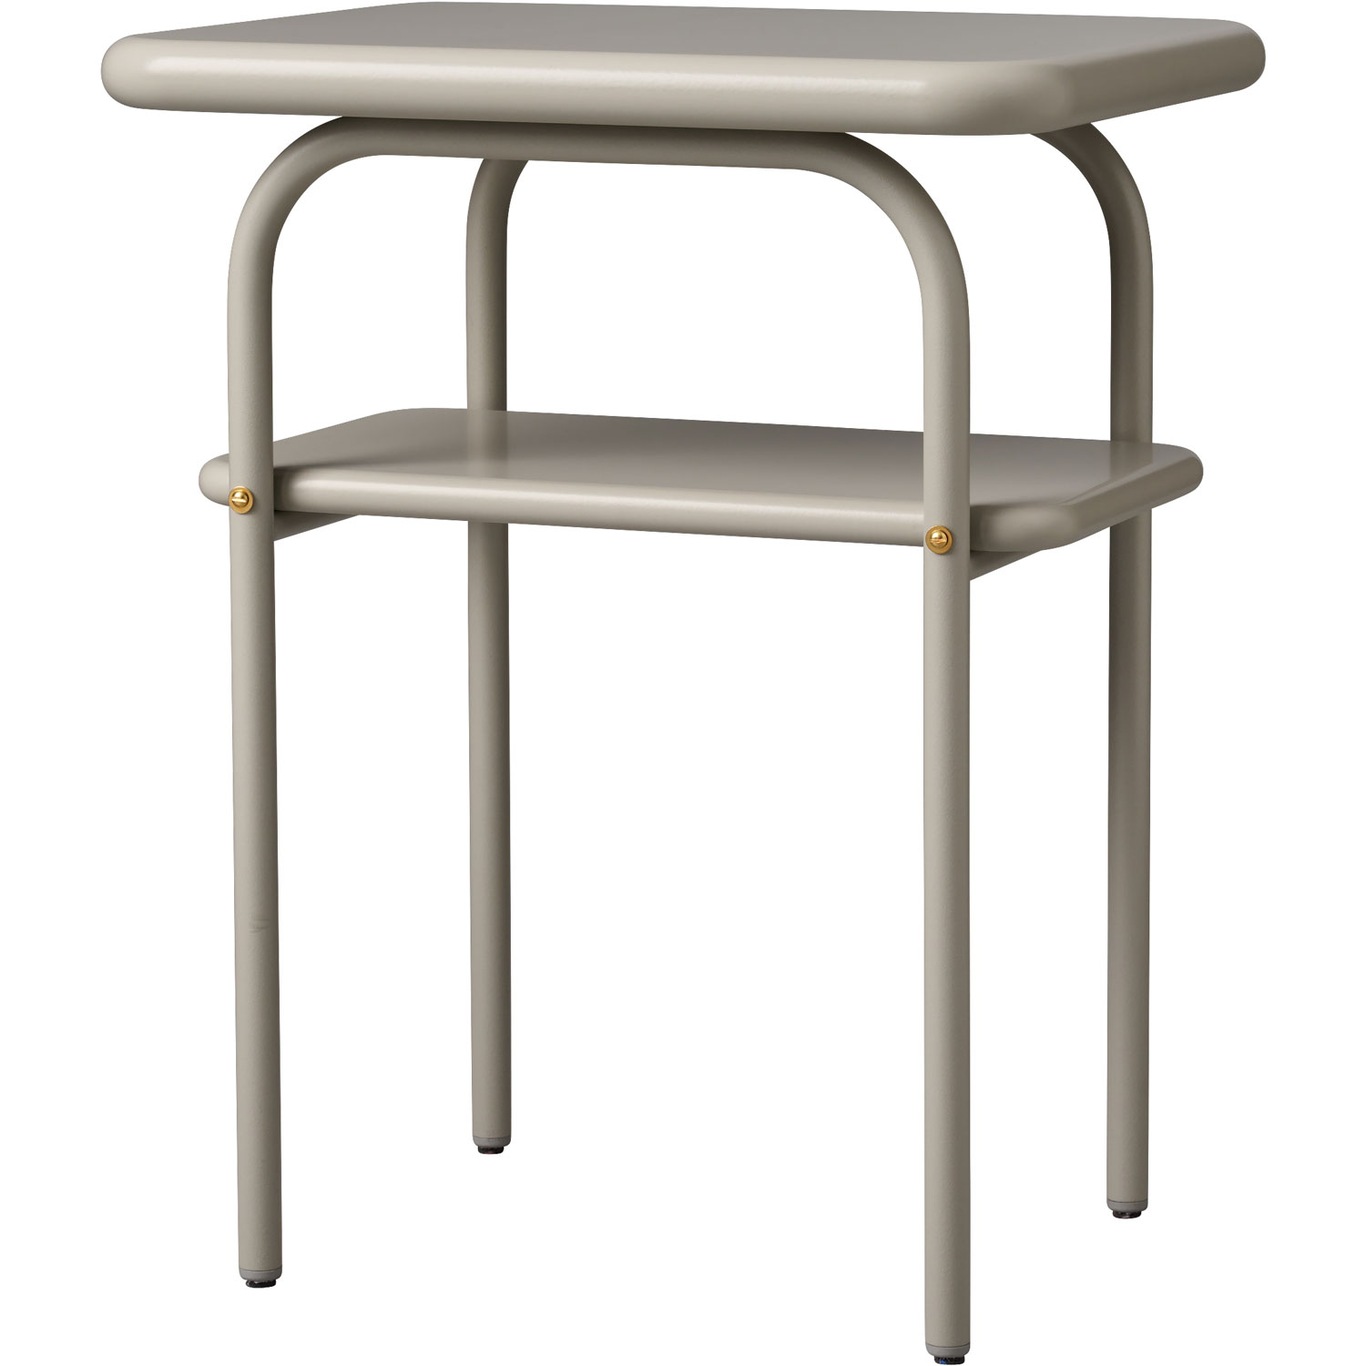 Anyplace Side Table, Silk grey